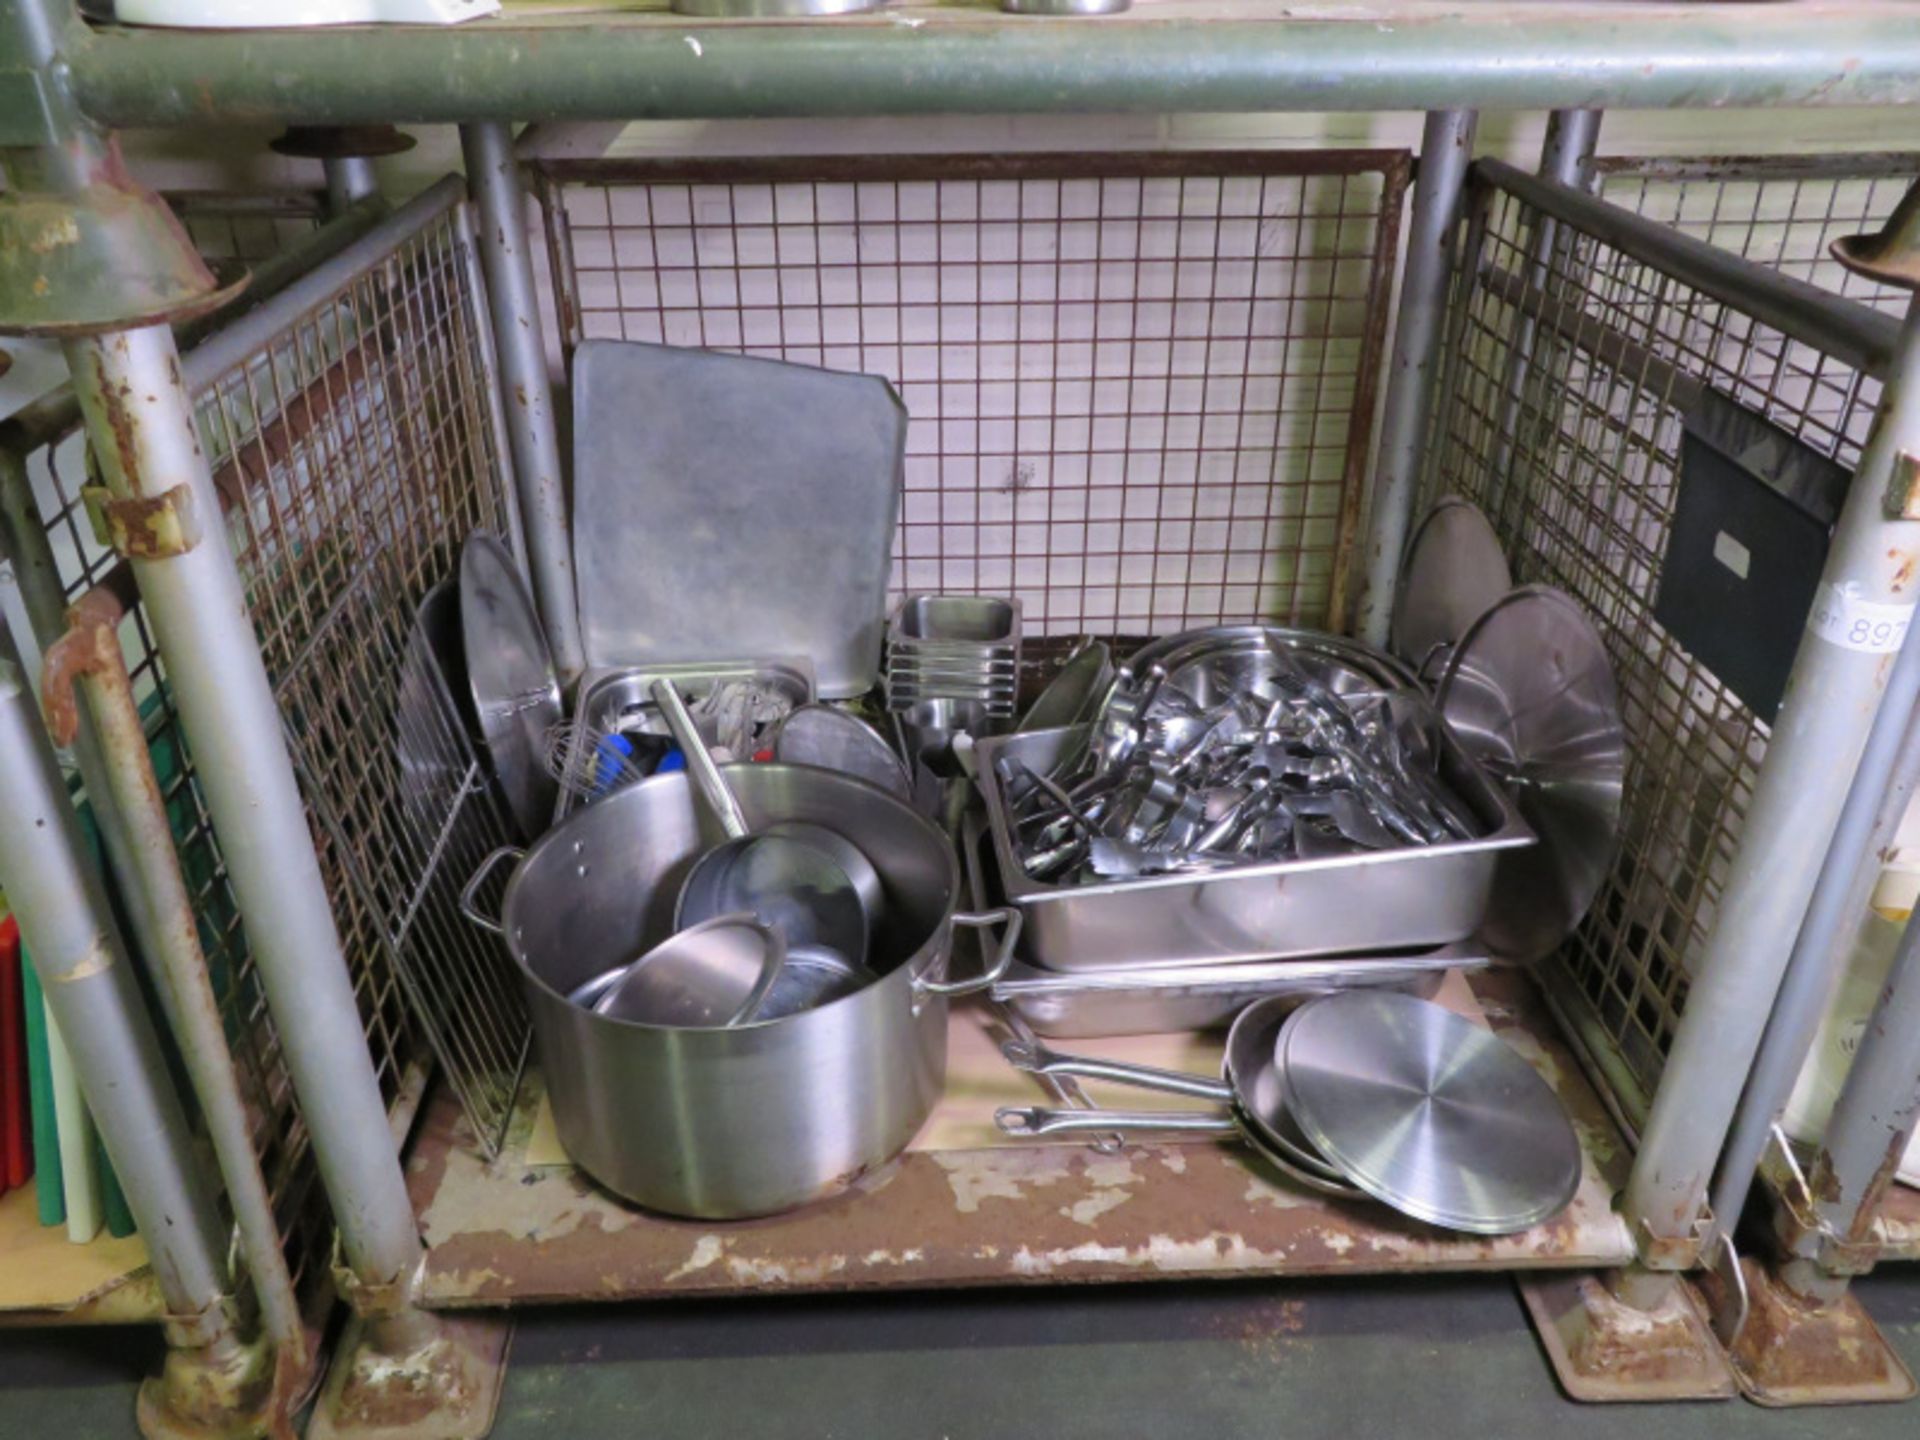 Stainless Steel Catering Equipment - gastronorm pans, cooking pot, shelf, pans, mixing bowls & more